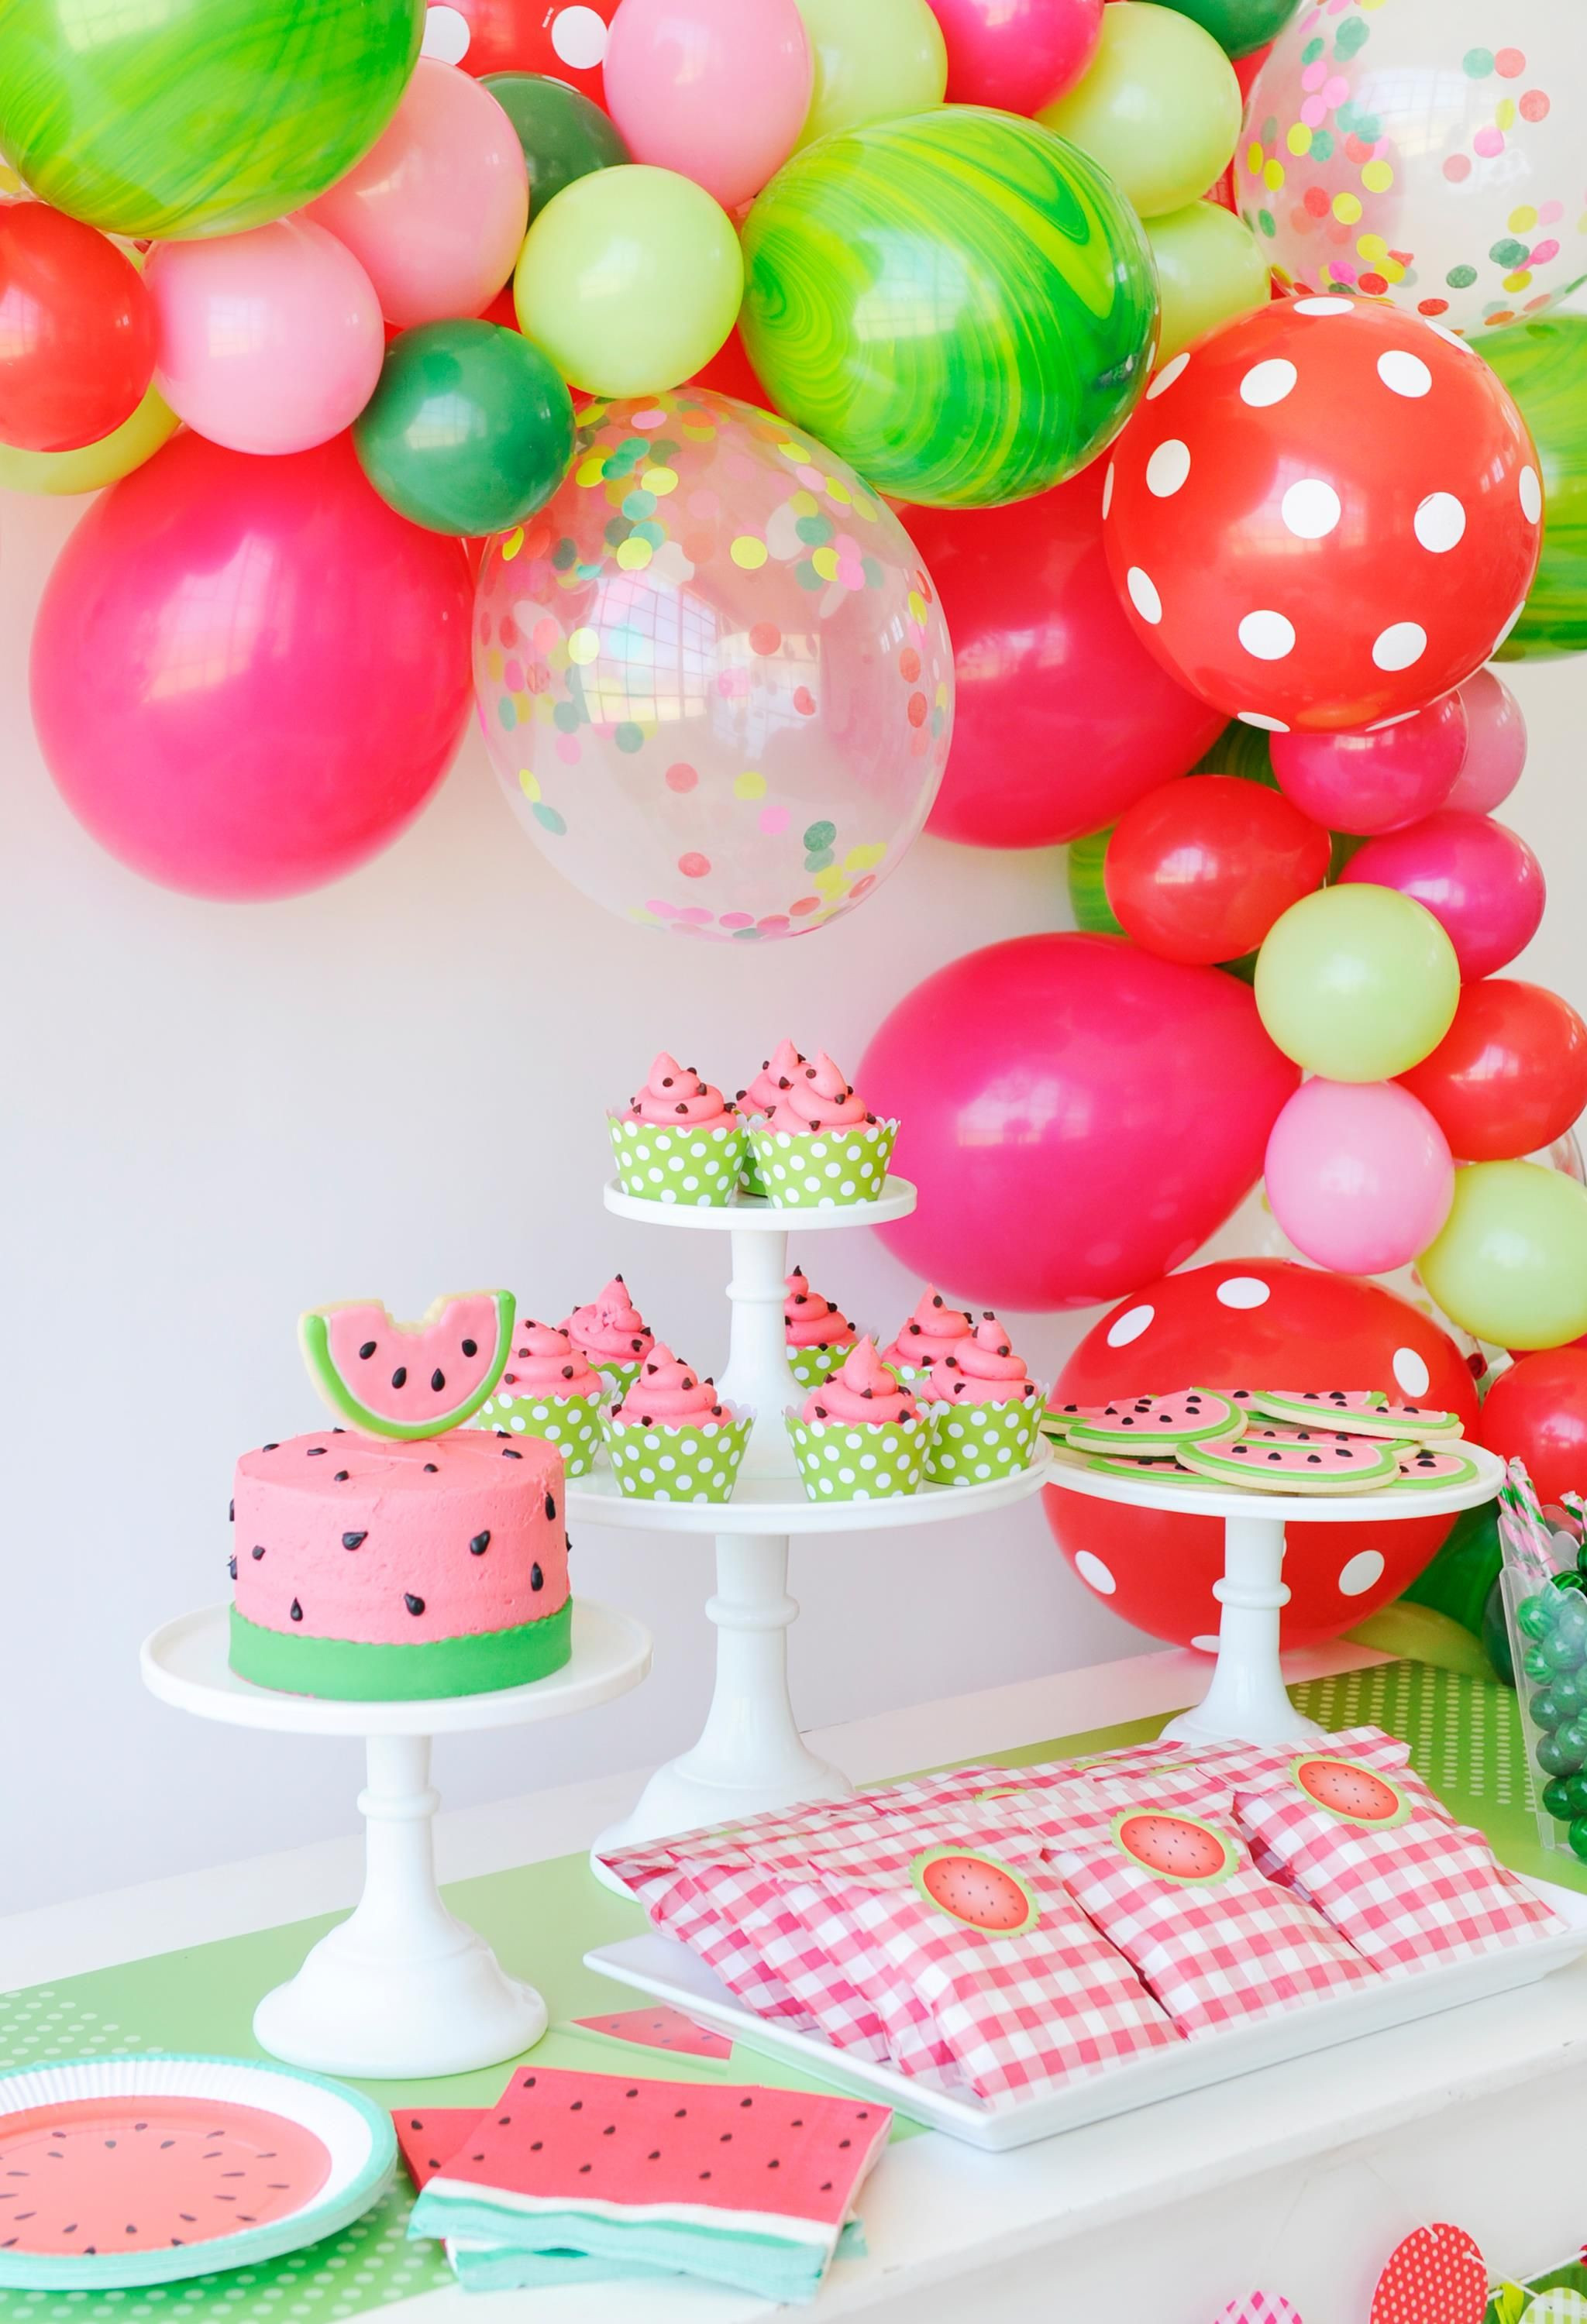 Summer Themed Party Ideas
 This Watermelon Party is Juicy & Delicious